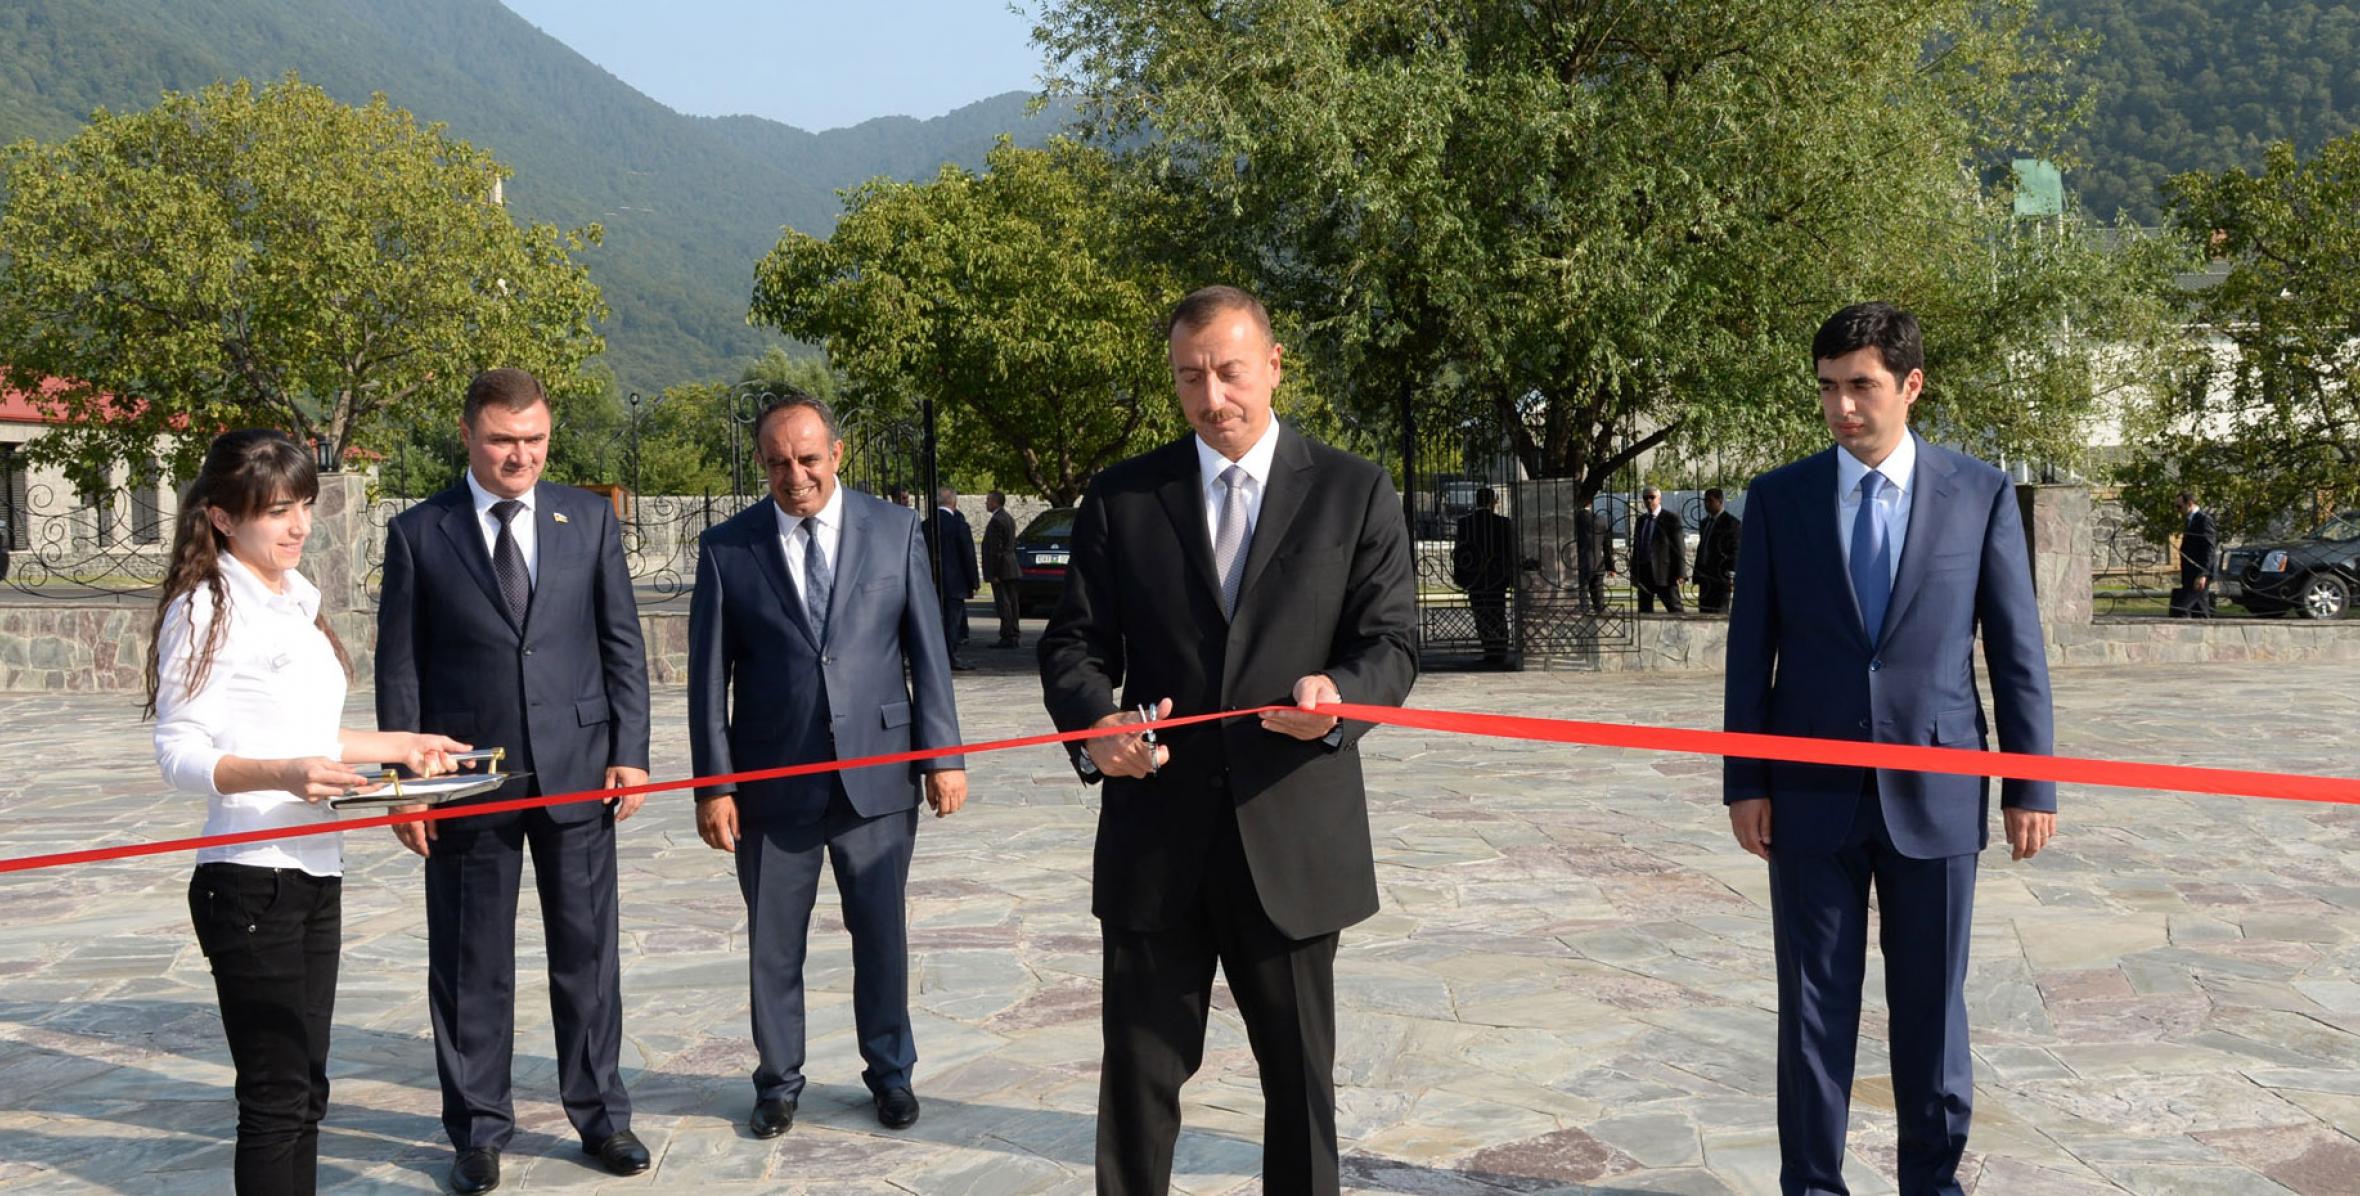 Ilham Aliyev attended the opening of a conference center at the El Resort Hotel in Gakh